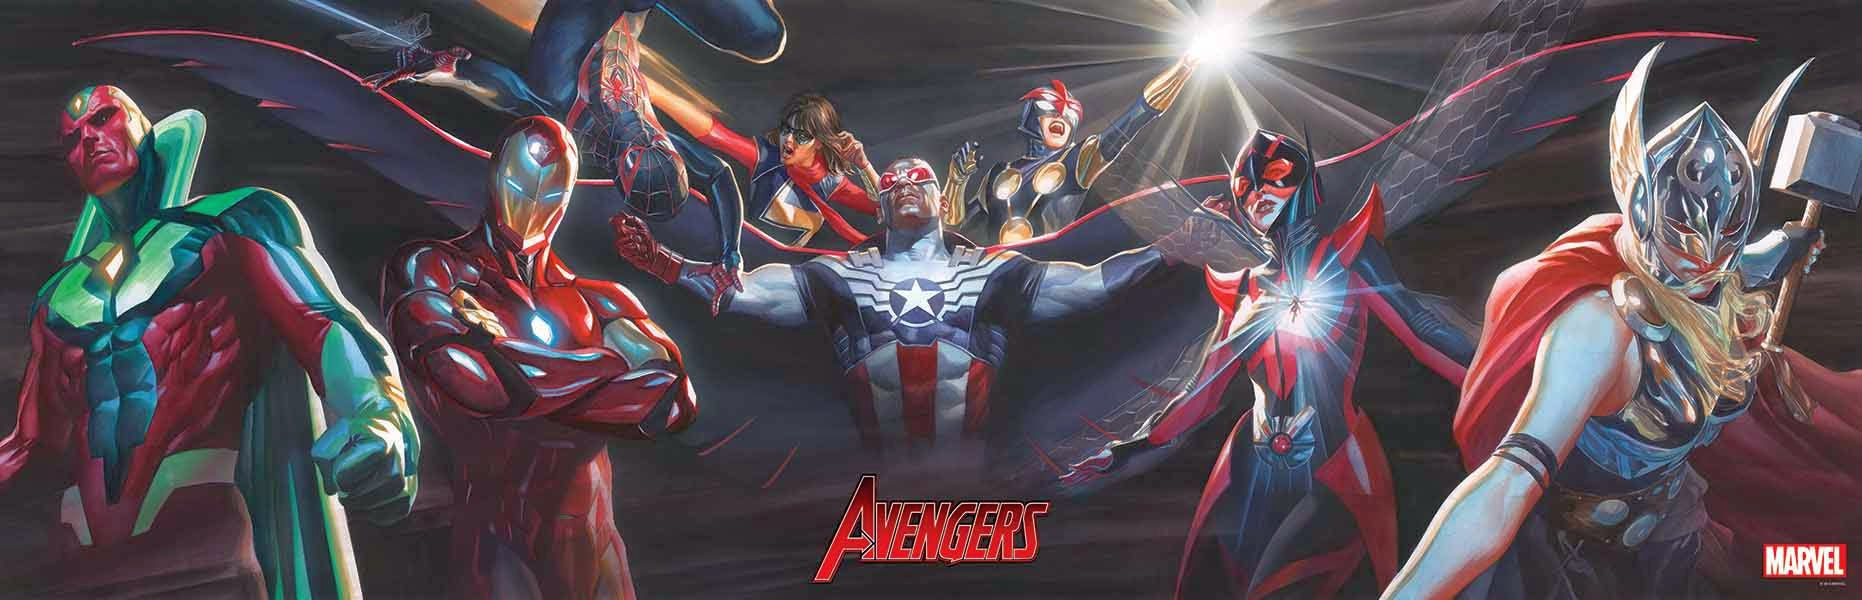 LINKING AVENGERS COVERS #1-5 BY ALEX ROSS VINYL POSTER